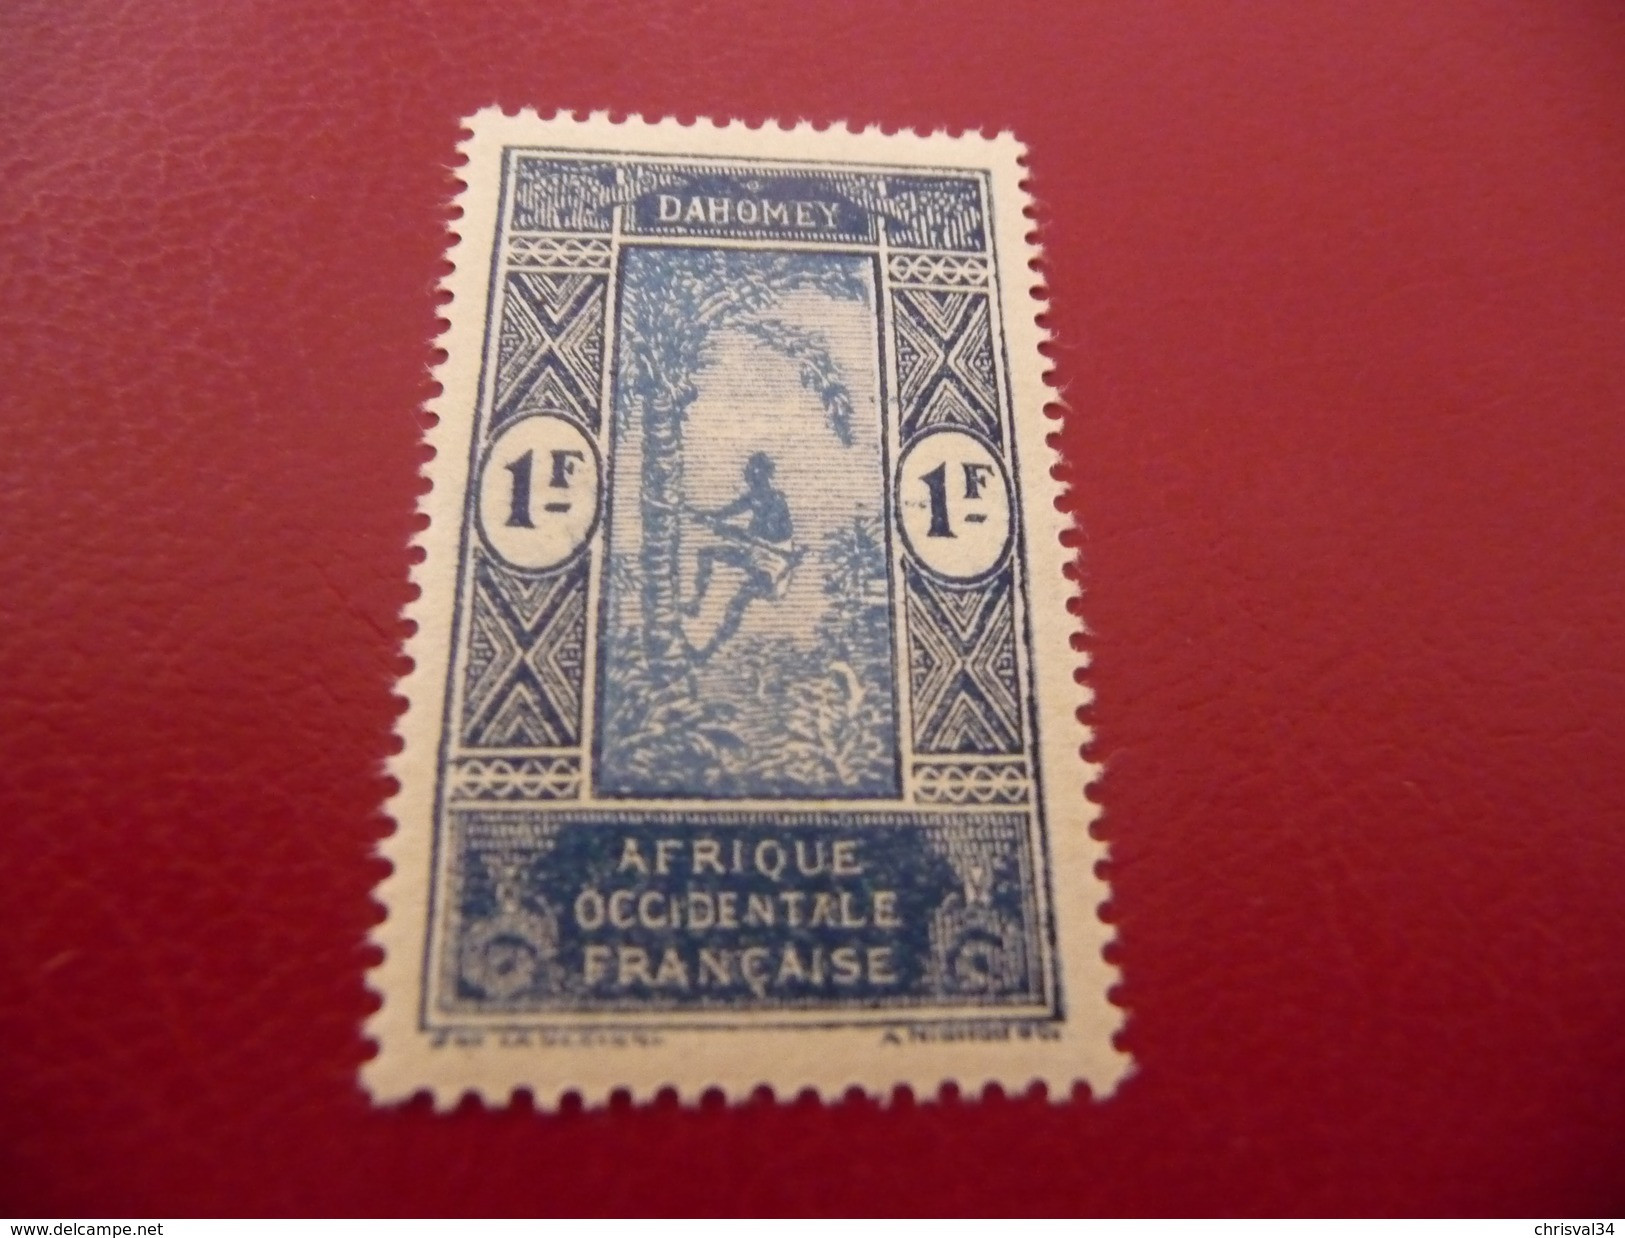 TIMBRE   DAHOMEY   N  78  COTE   3,00  EUROS   NEUF  SANS  CHARNIERE - Unused Stamps